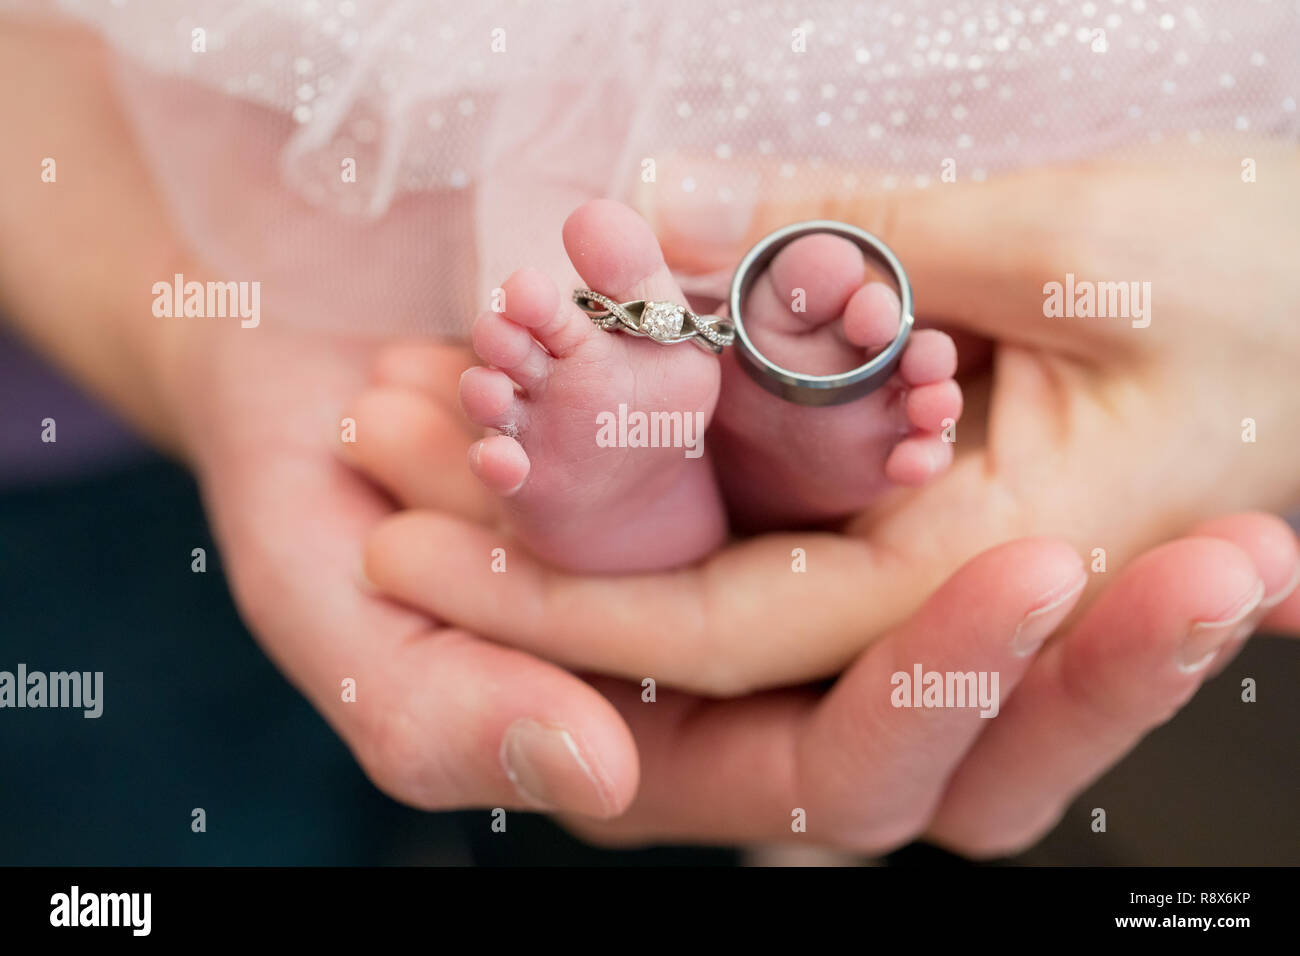 Wedding Rings on Newborn Baby Feet with Parents Hands Holding Stock Photo